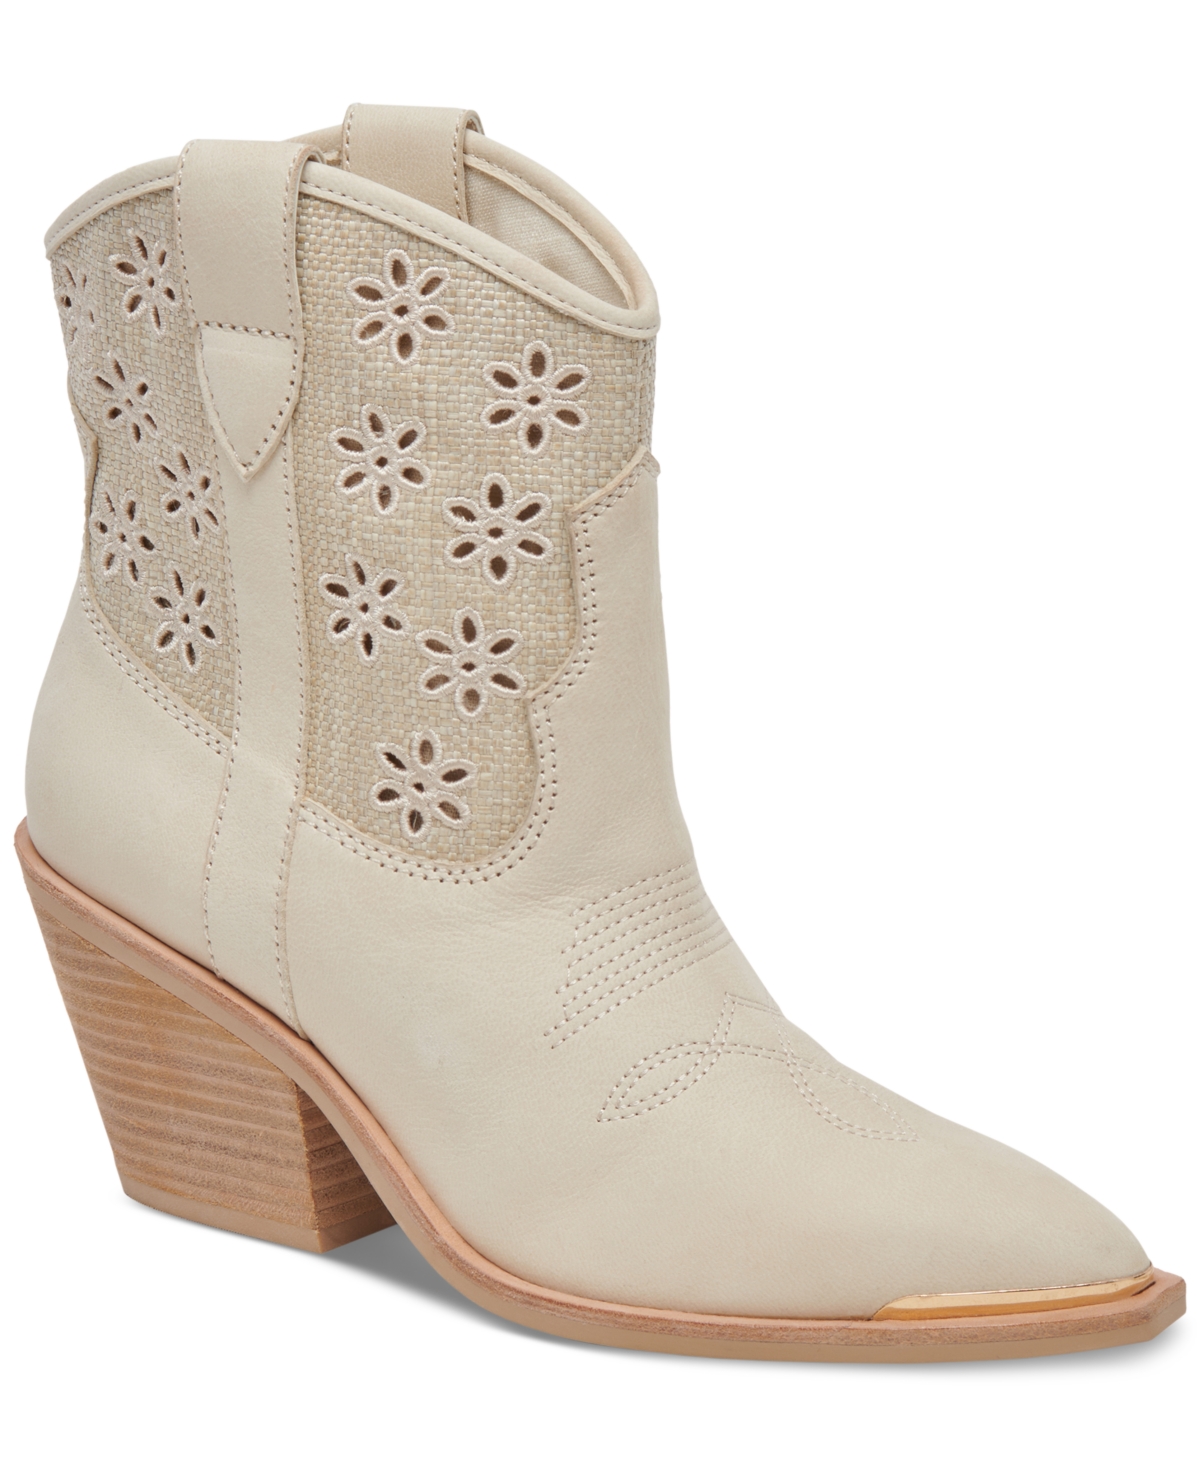 Women's Nashe Western Booties - Oatmeal Floral Eyelet